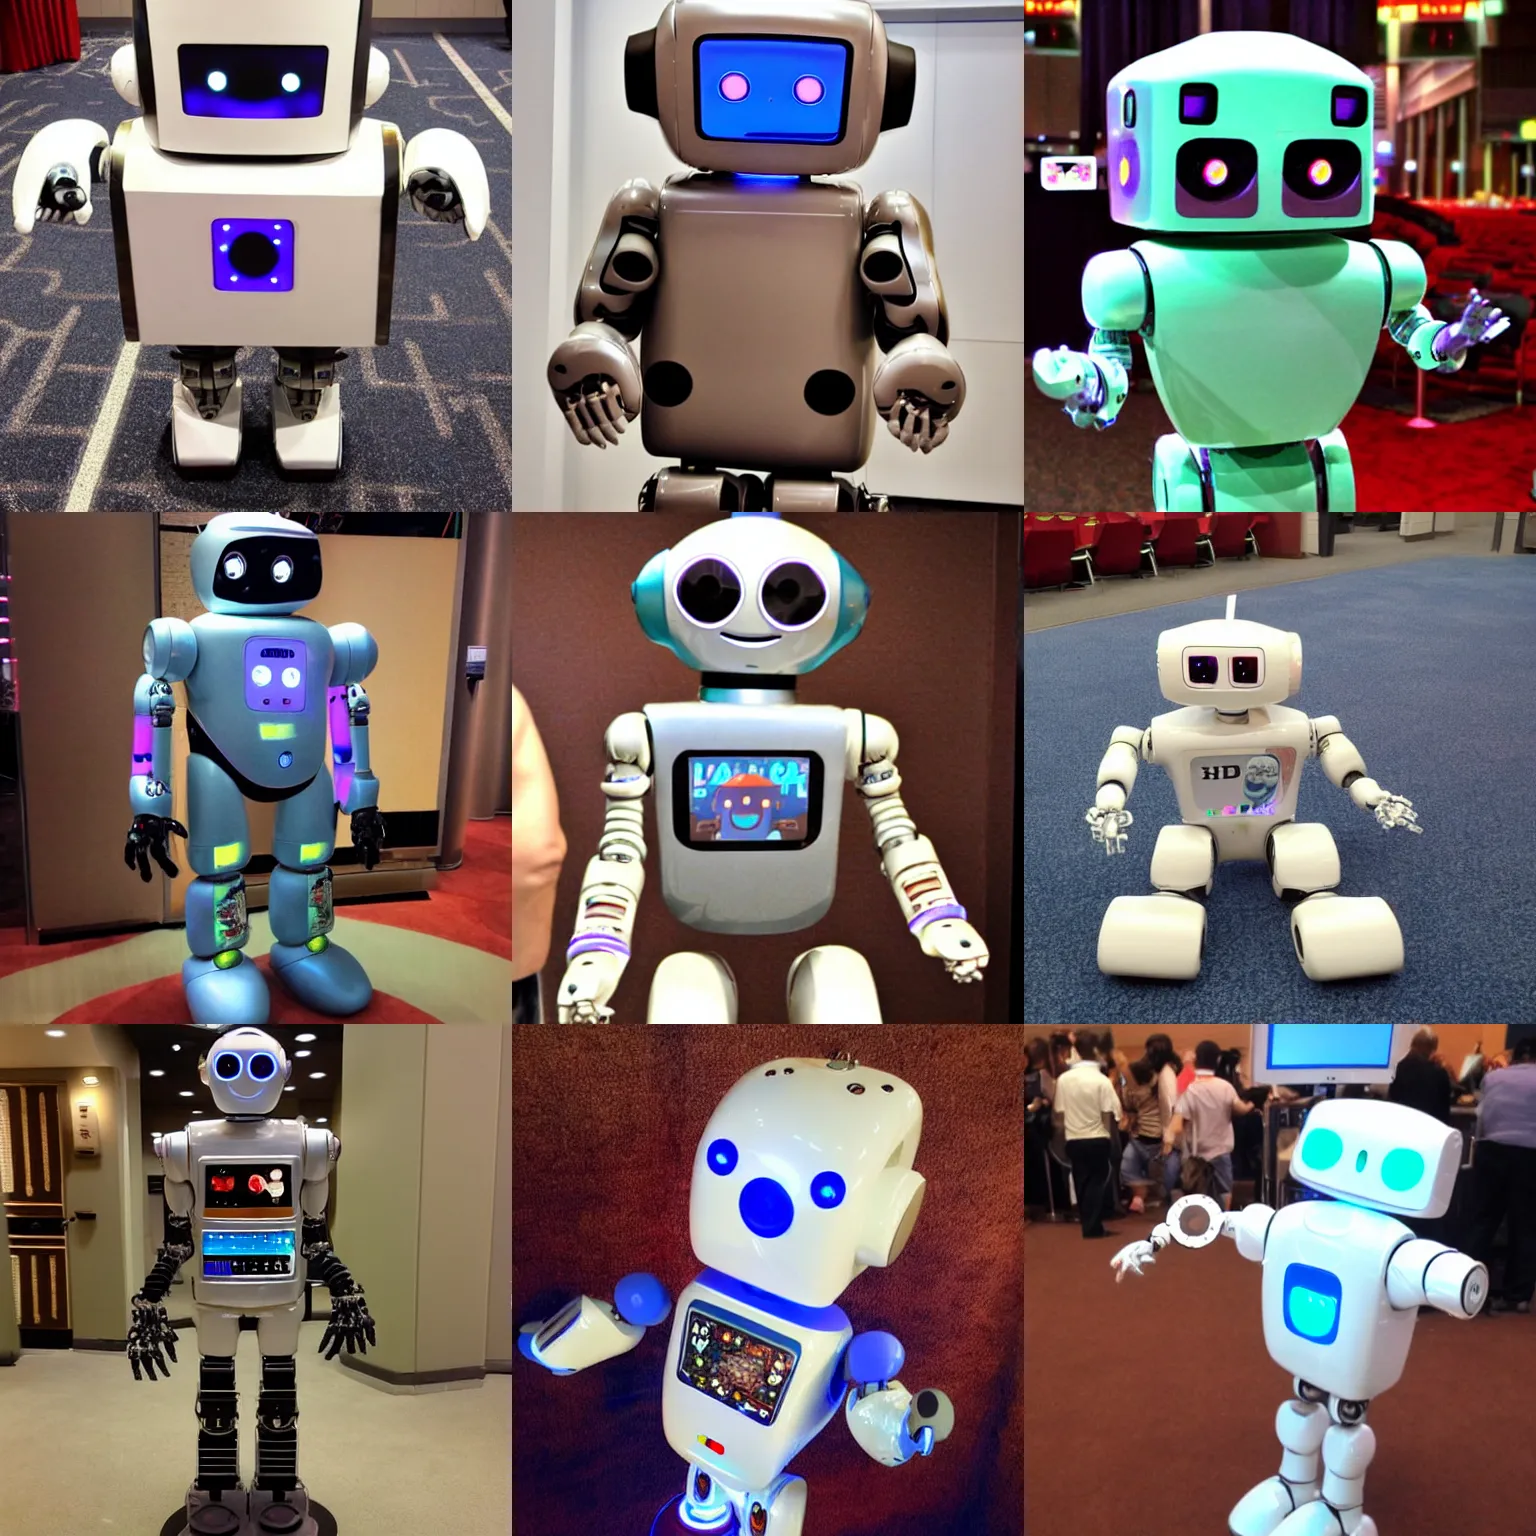 Prompt: <robot hd attention-grabbing desire='hugs' traits='fluffy cute adorable' location='las vegas convention center'>should i keep it?</robot>